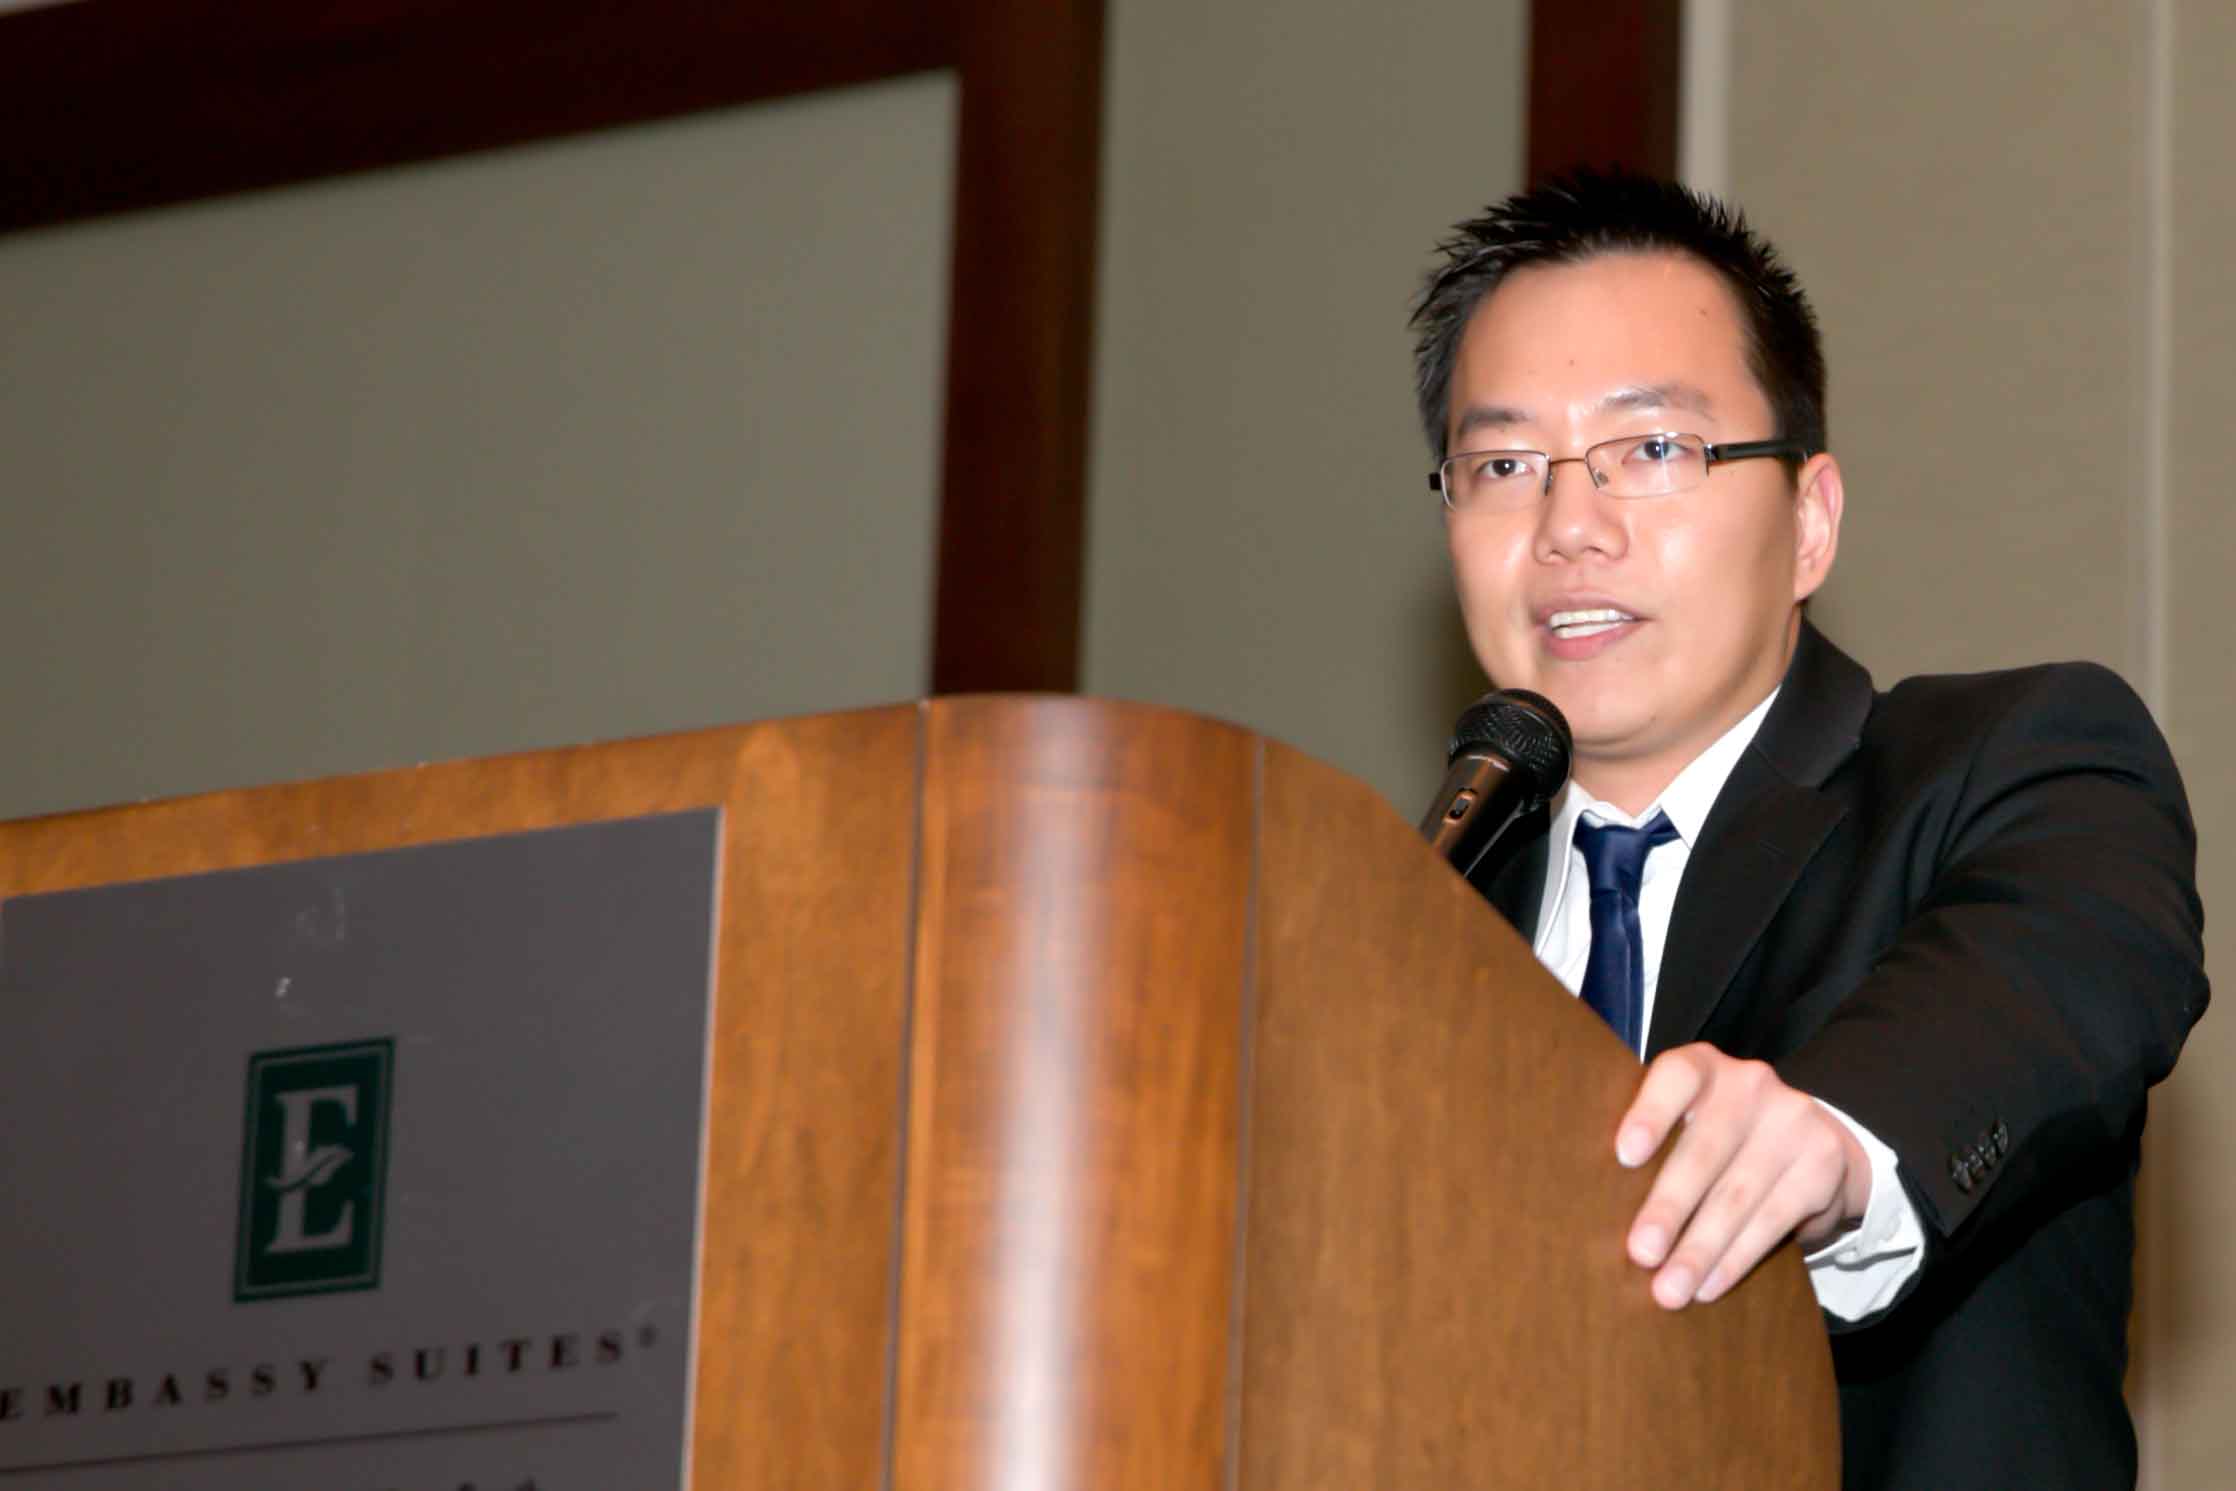 Tony Kim shares thoughts on leadership and leverage